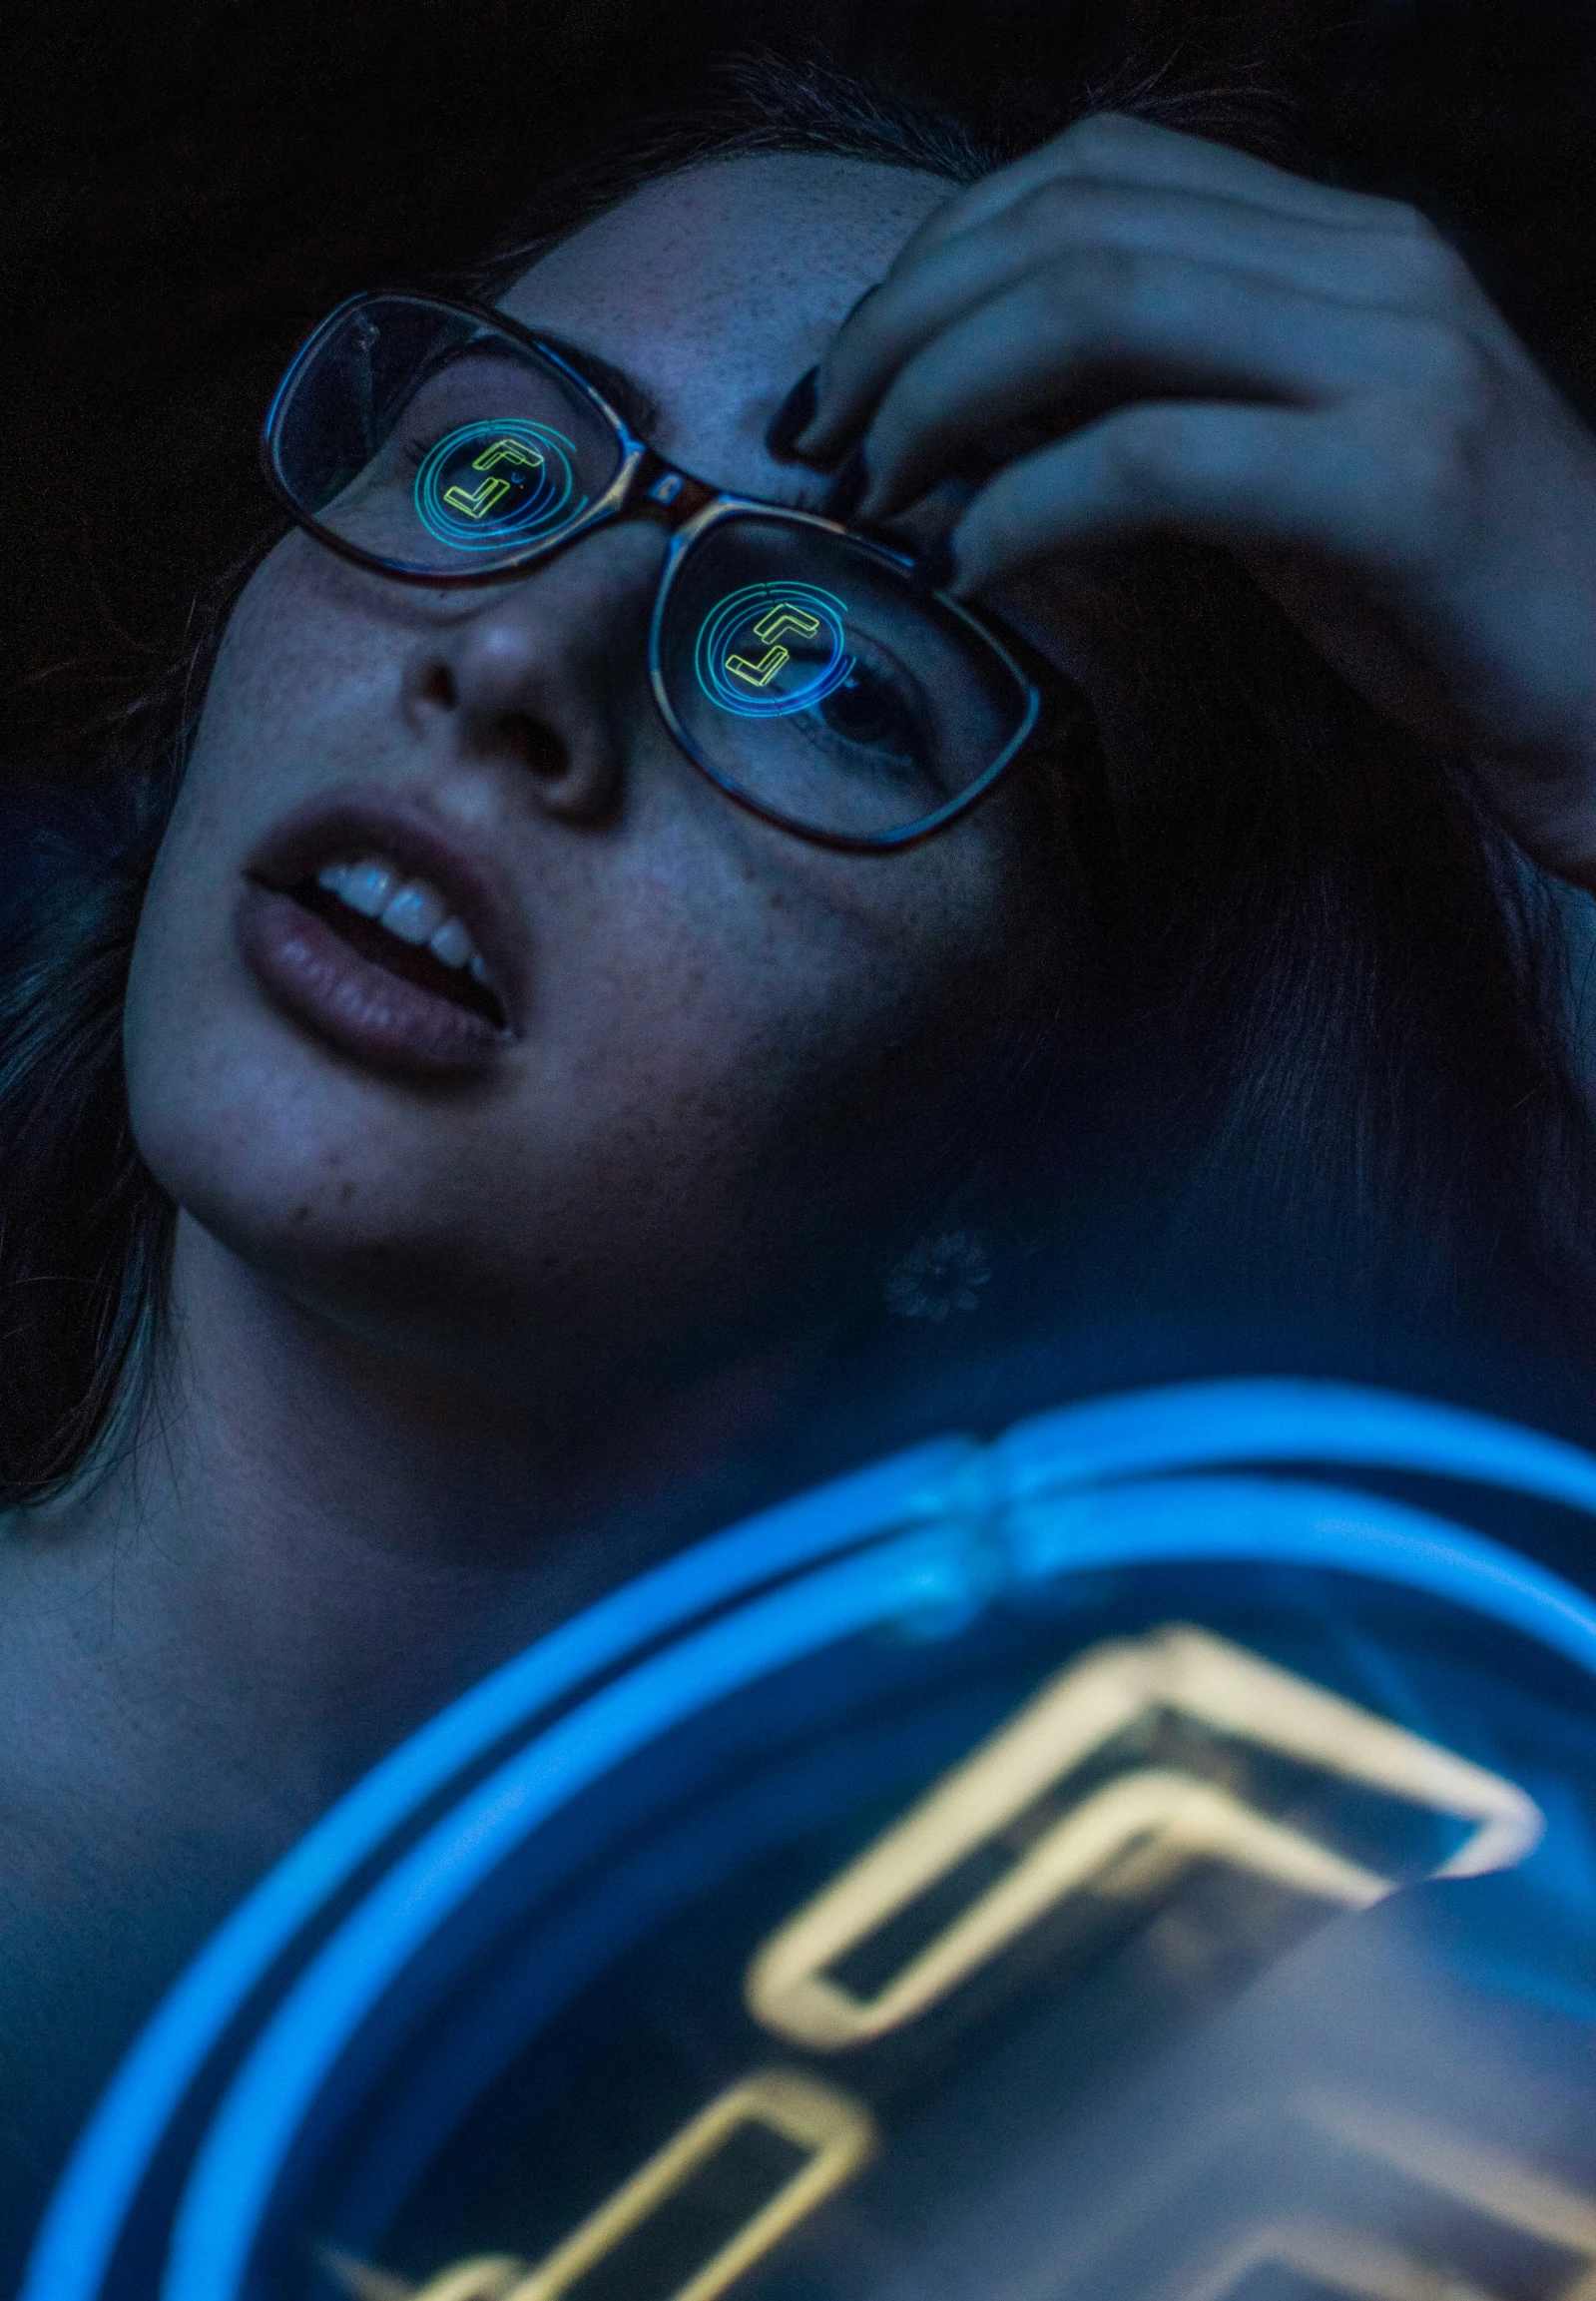 a woman wearing glasses holding onto her eye with glowing circles